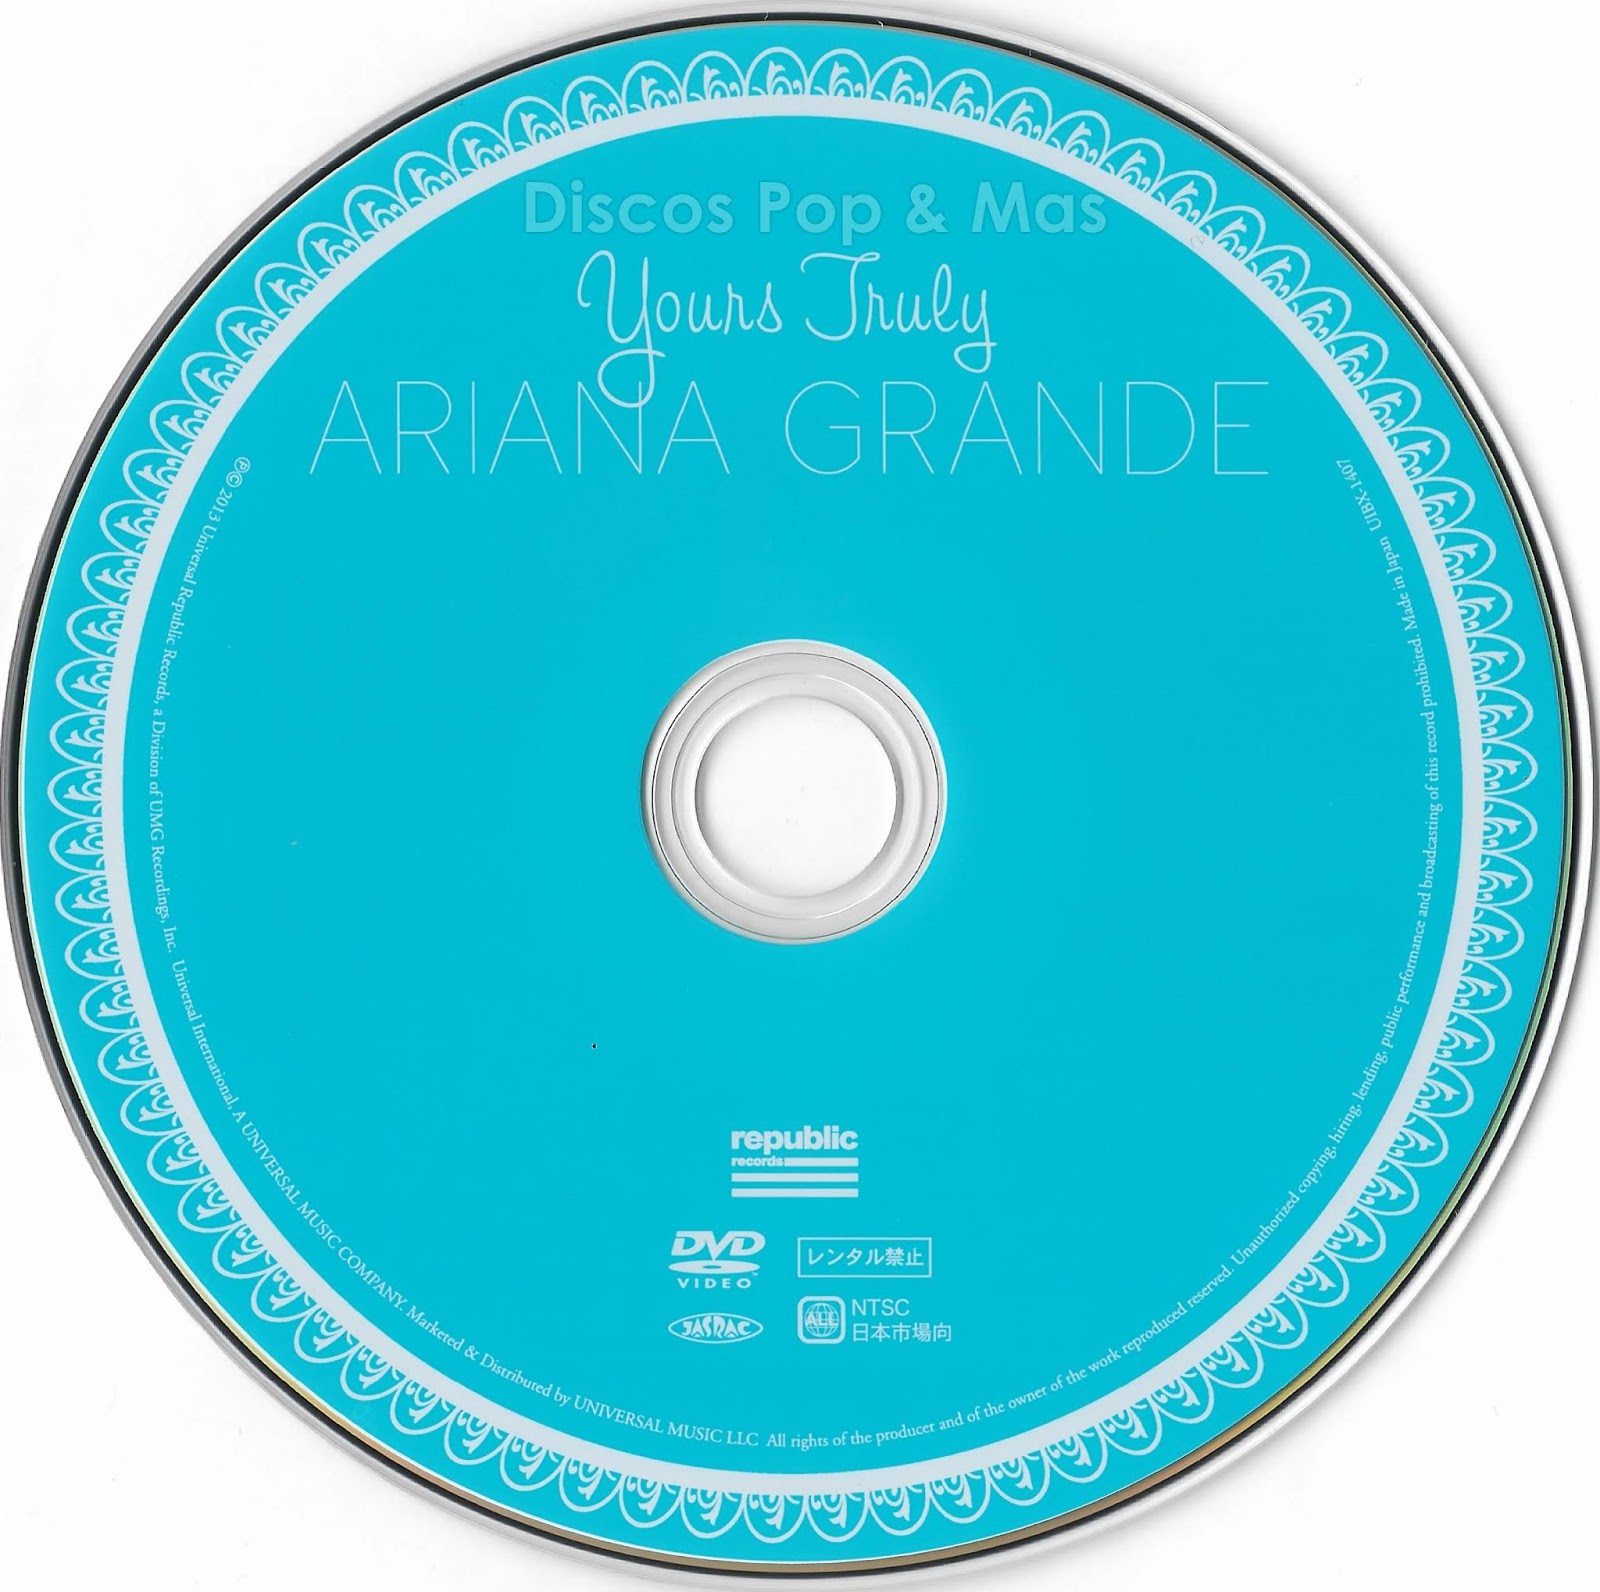 Discos Pop & Mas: Ariana Grande - Yours Truly (Japanese Deluxe Edition)